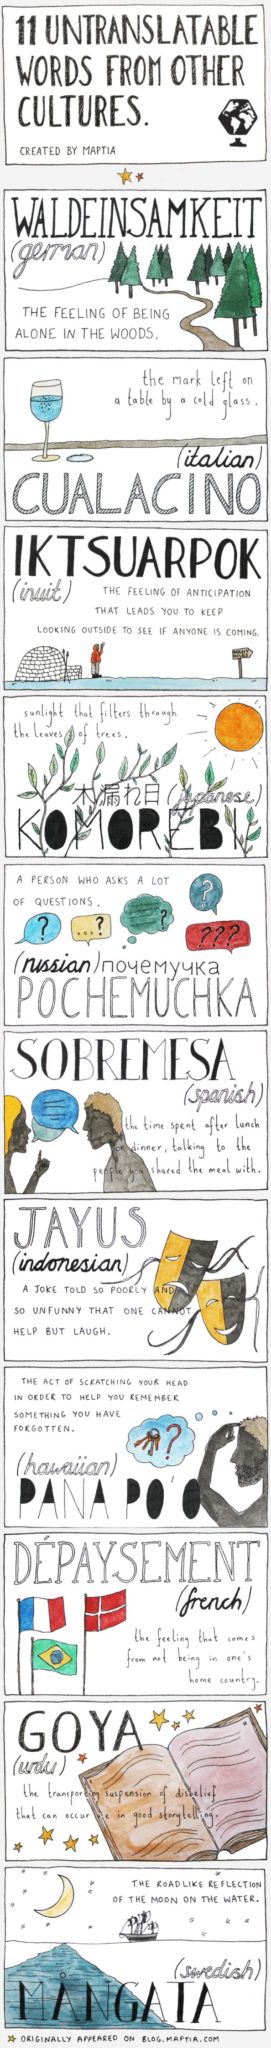 11 untranslatable words from other cultures